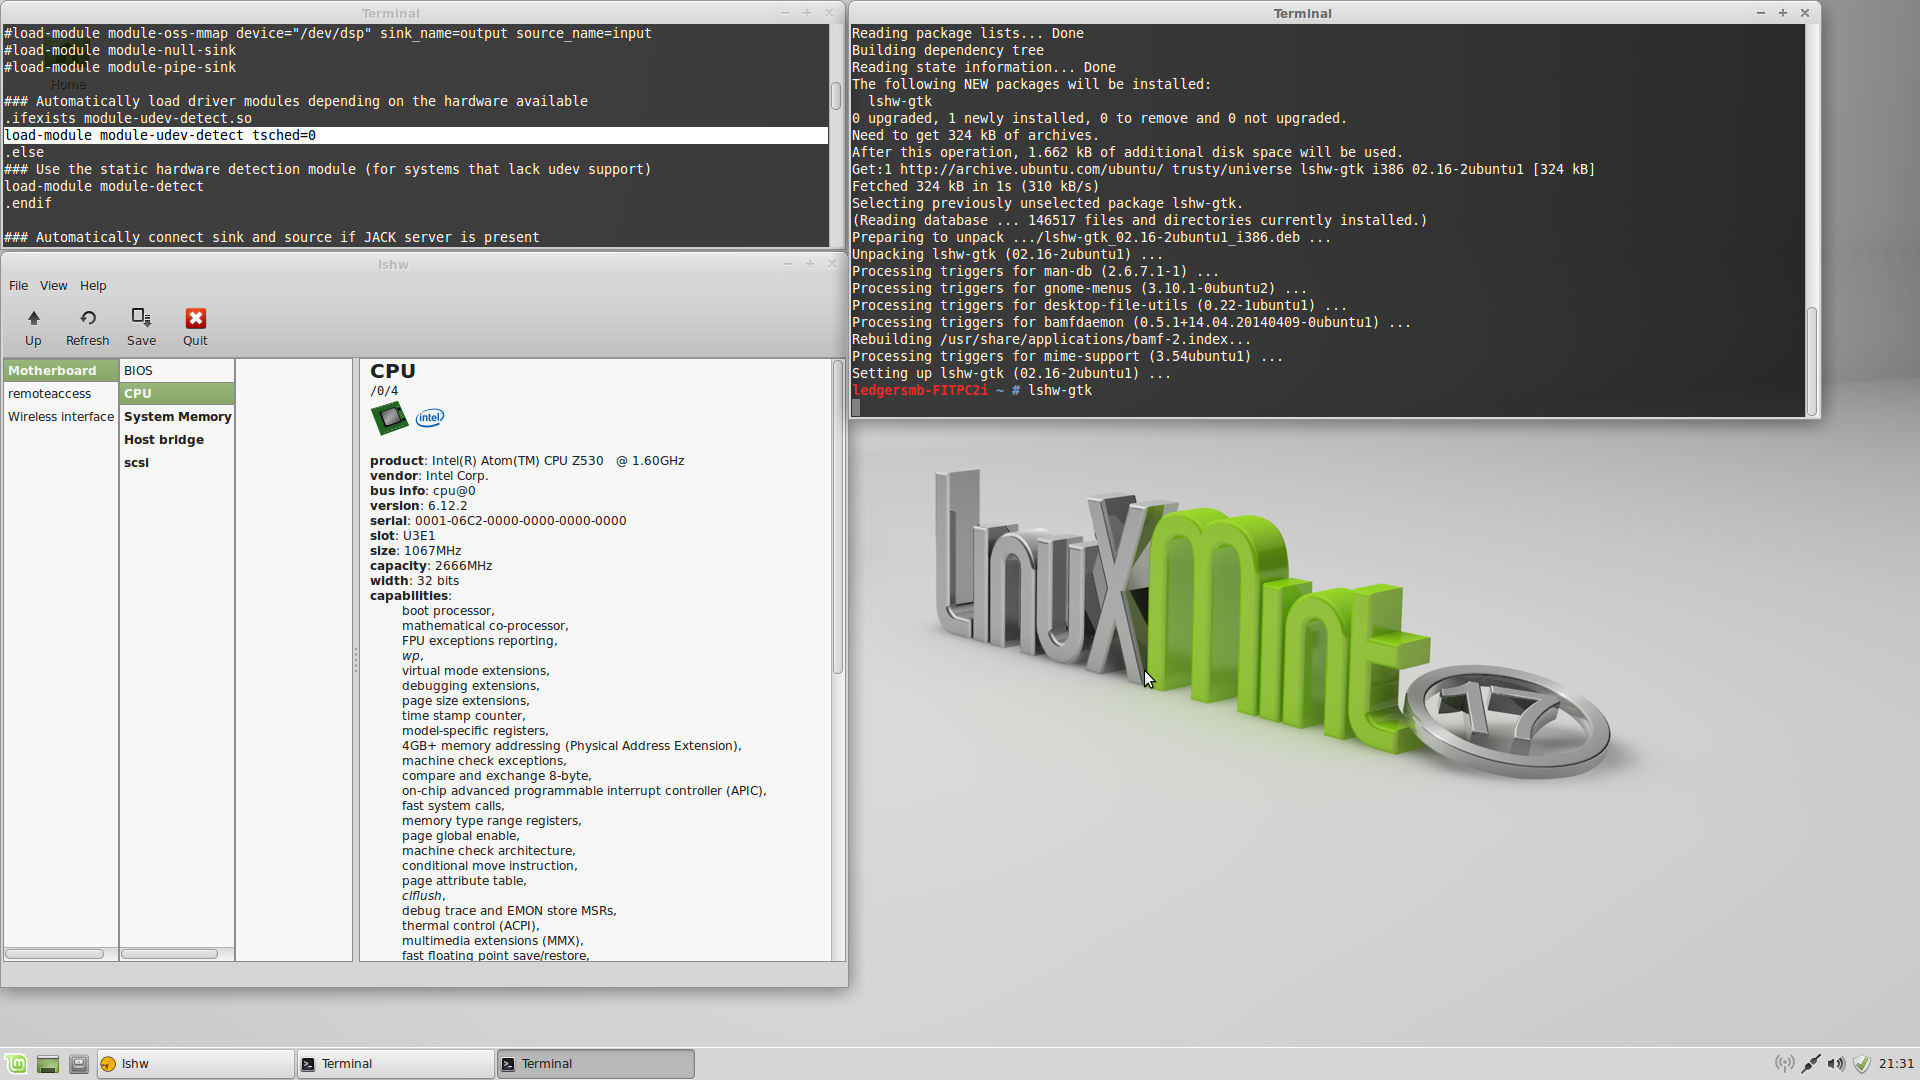 Look &amp; feel of Linuxmint 17 Xfce on Fit-PC2i . You can see an inverted line in the top-left console, that is the solution for choppy audio playback.